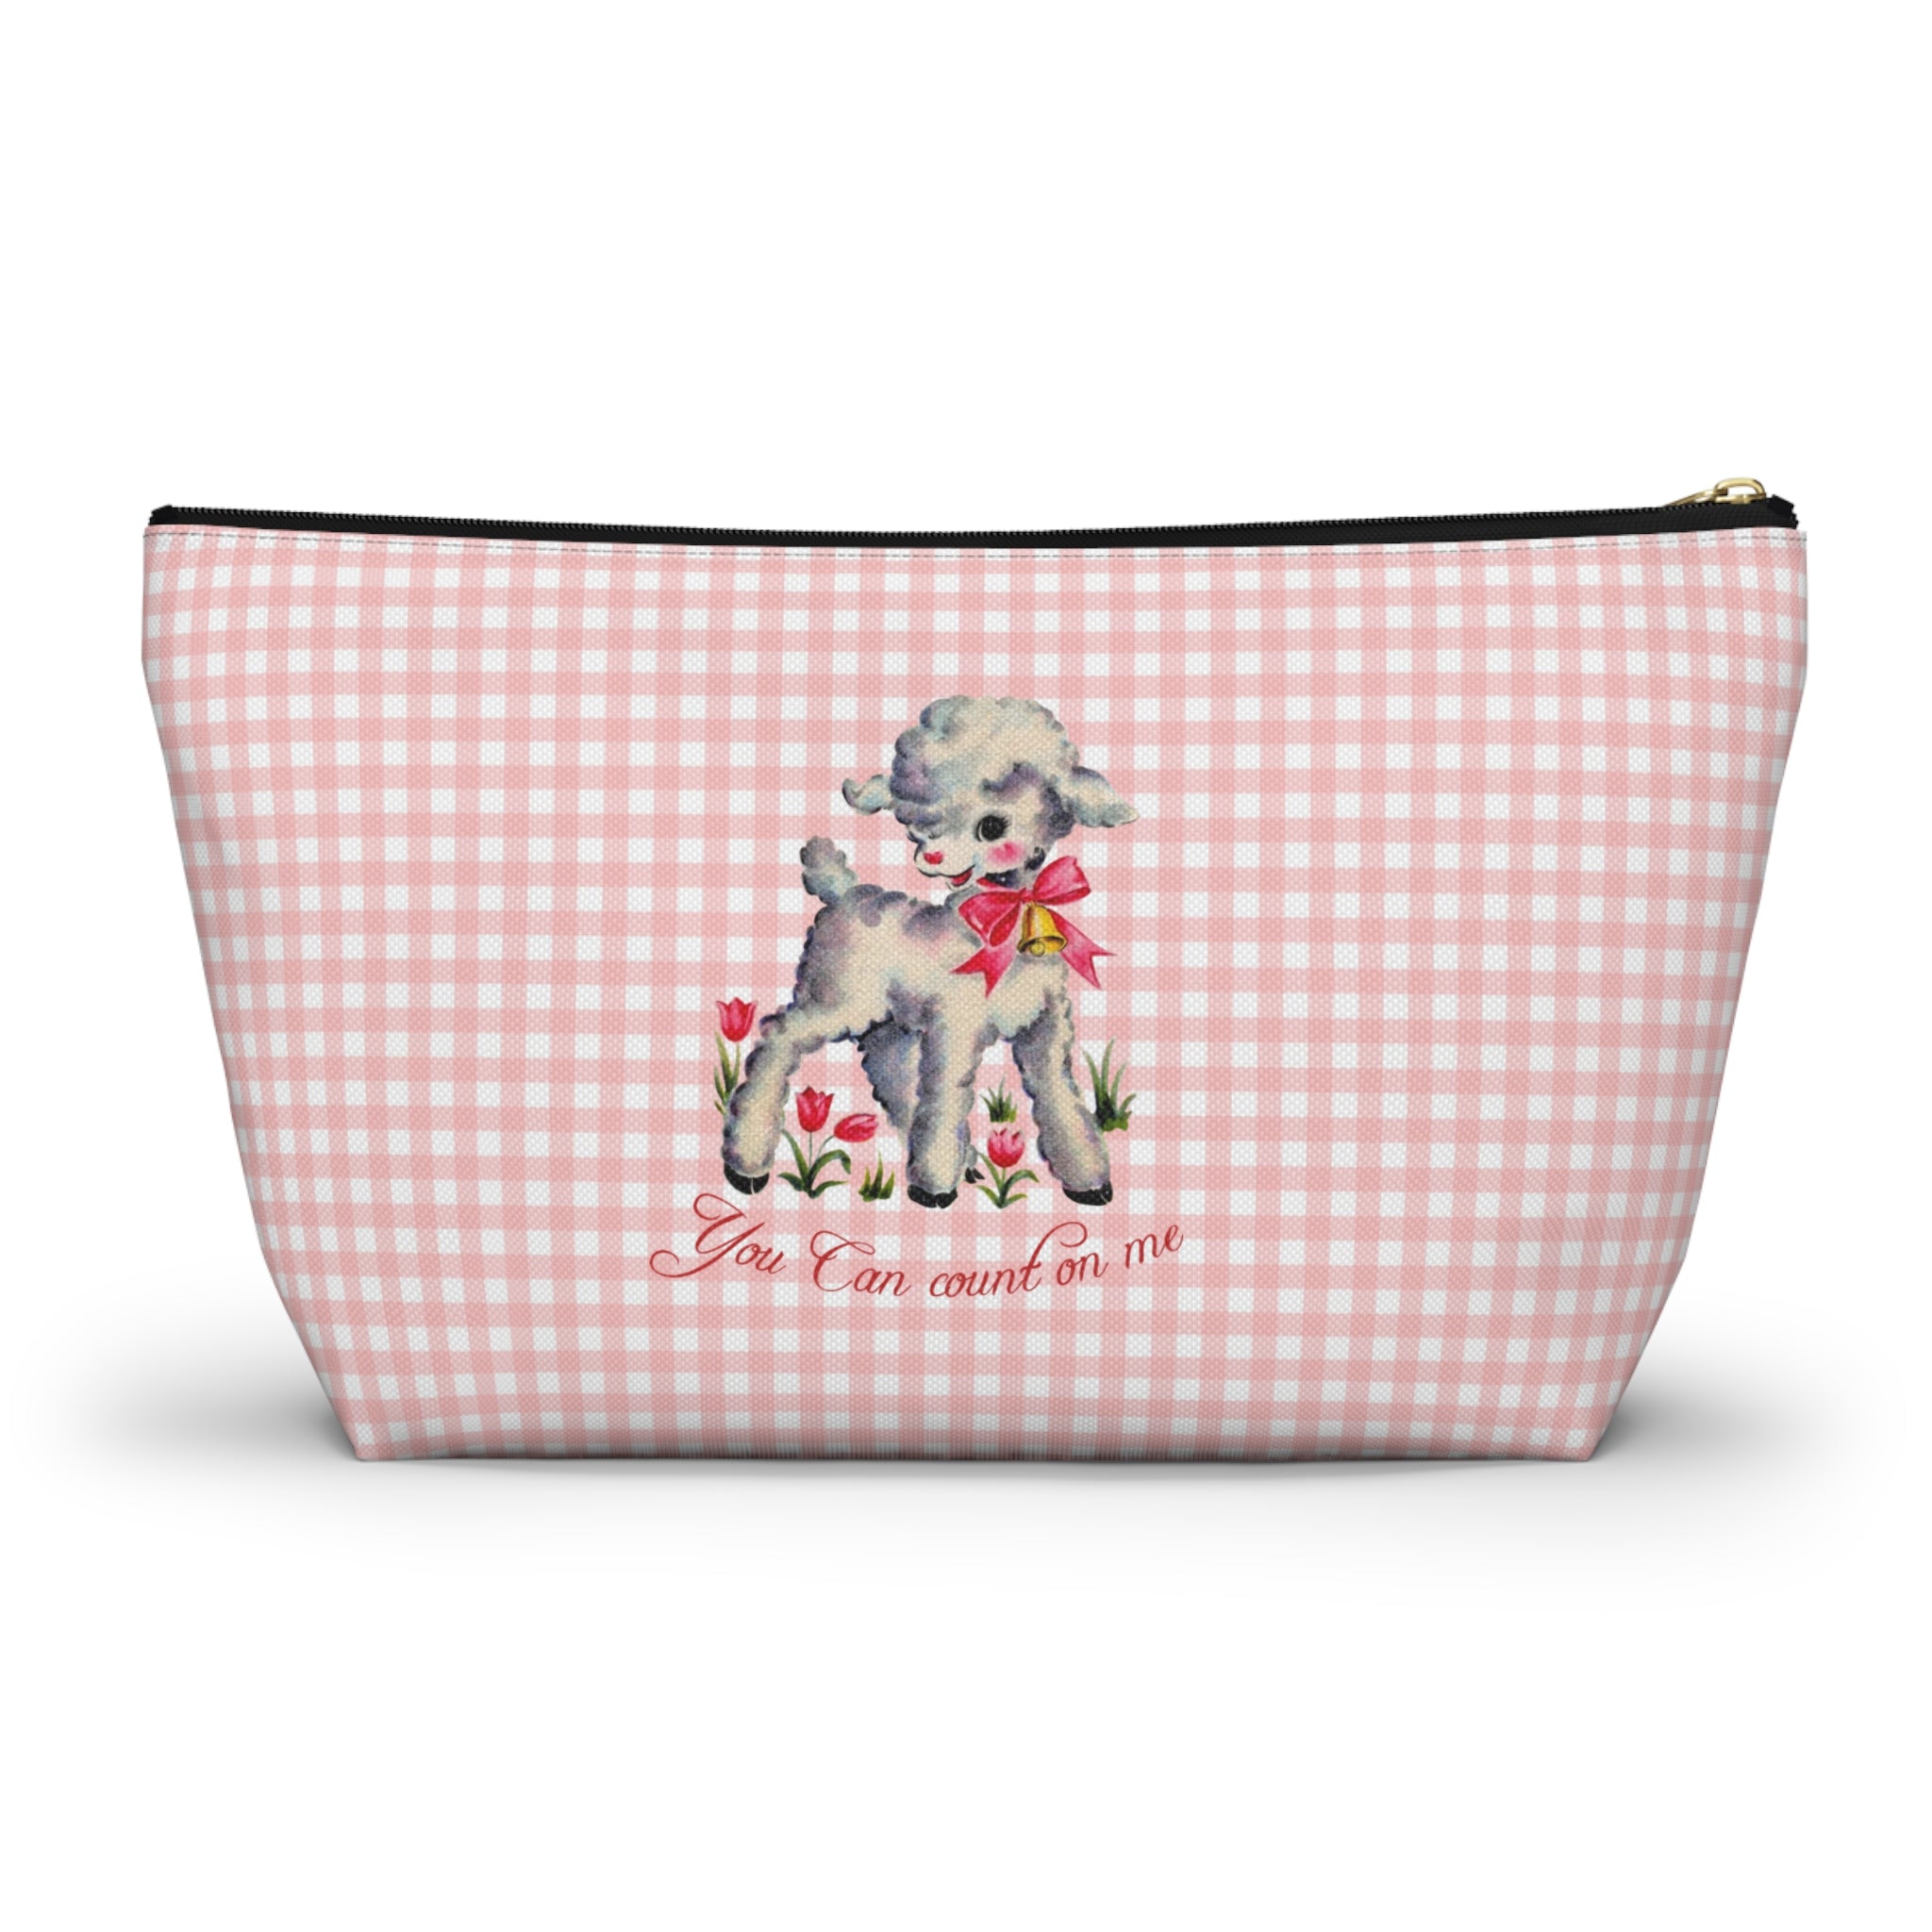 Bag, Coquette Bag, Coquette Make-up Bag, Coquette Zipper Pouch